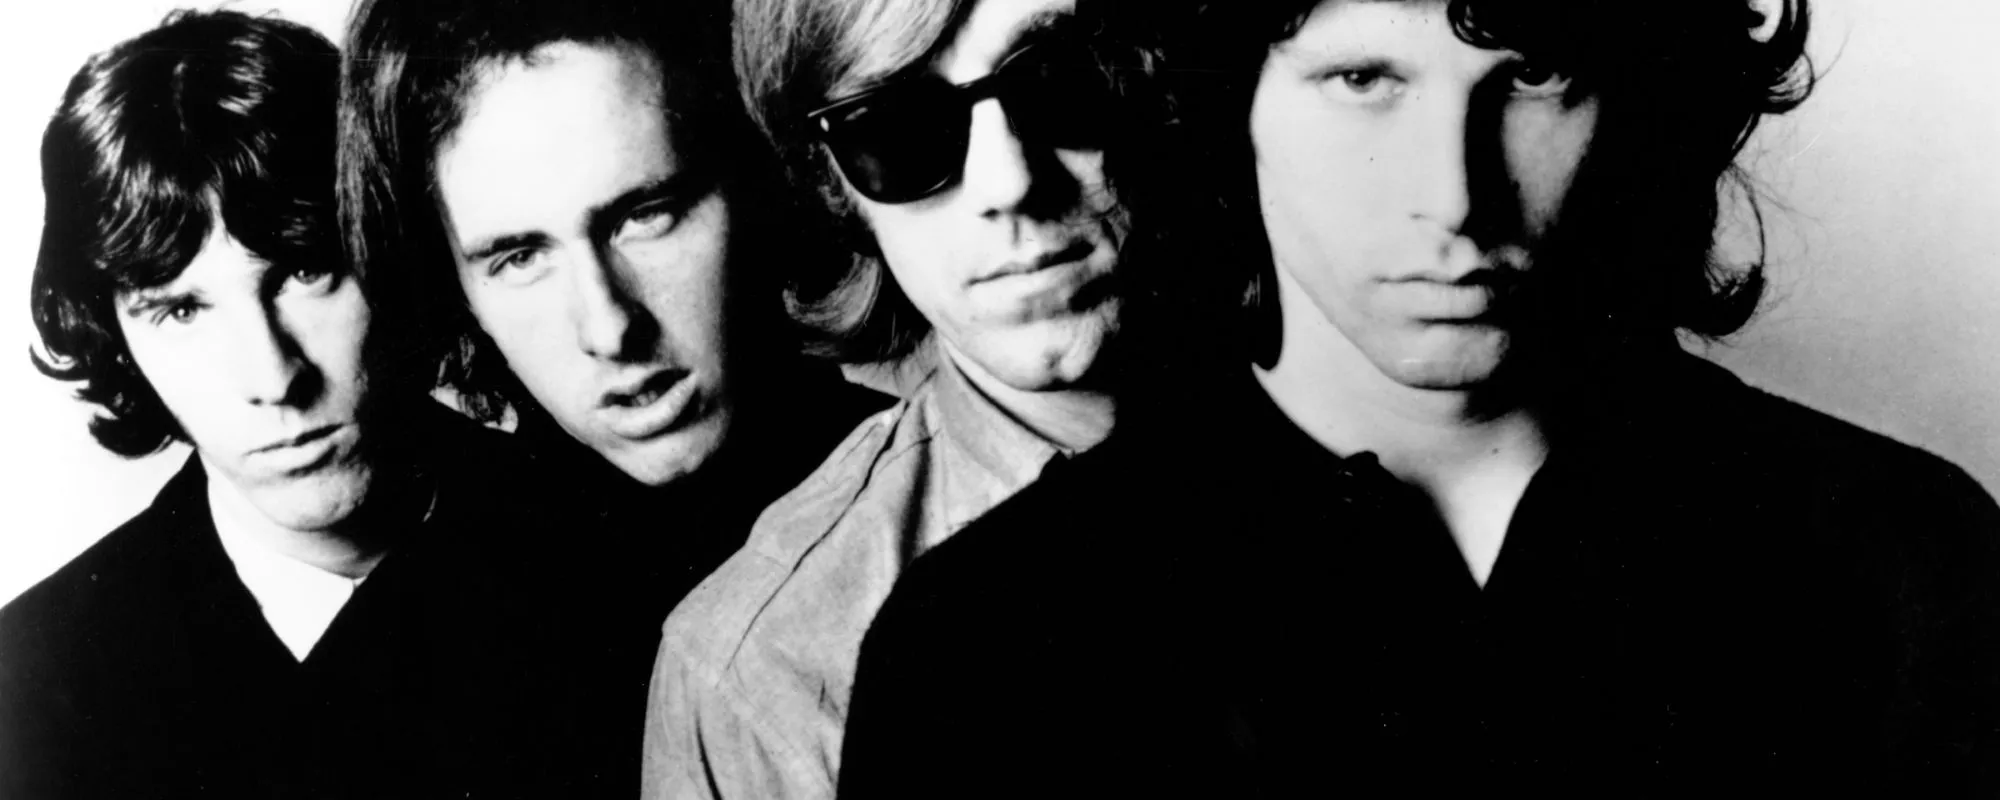 The Doors Official Anthology Available For Pre-Order Ahead of 60th Anniversary